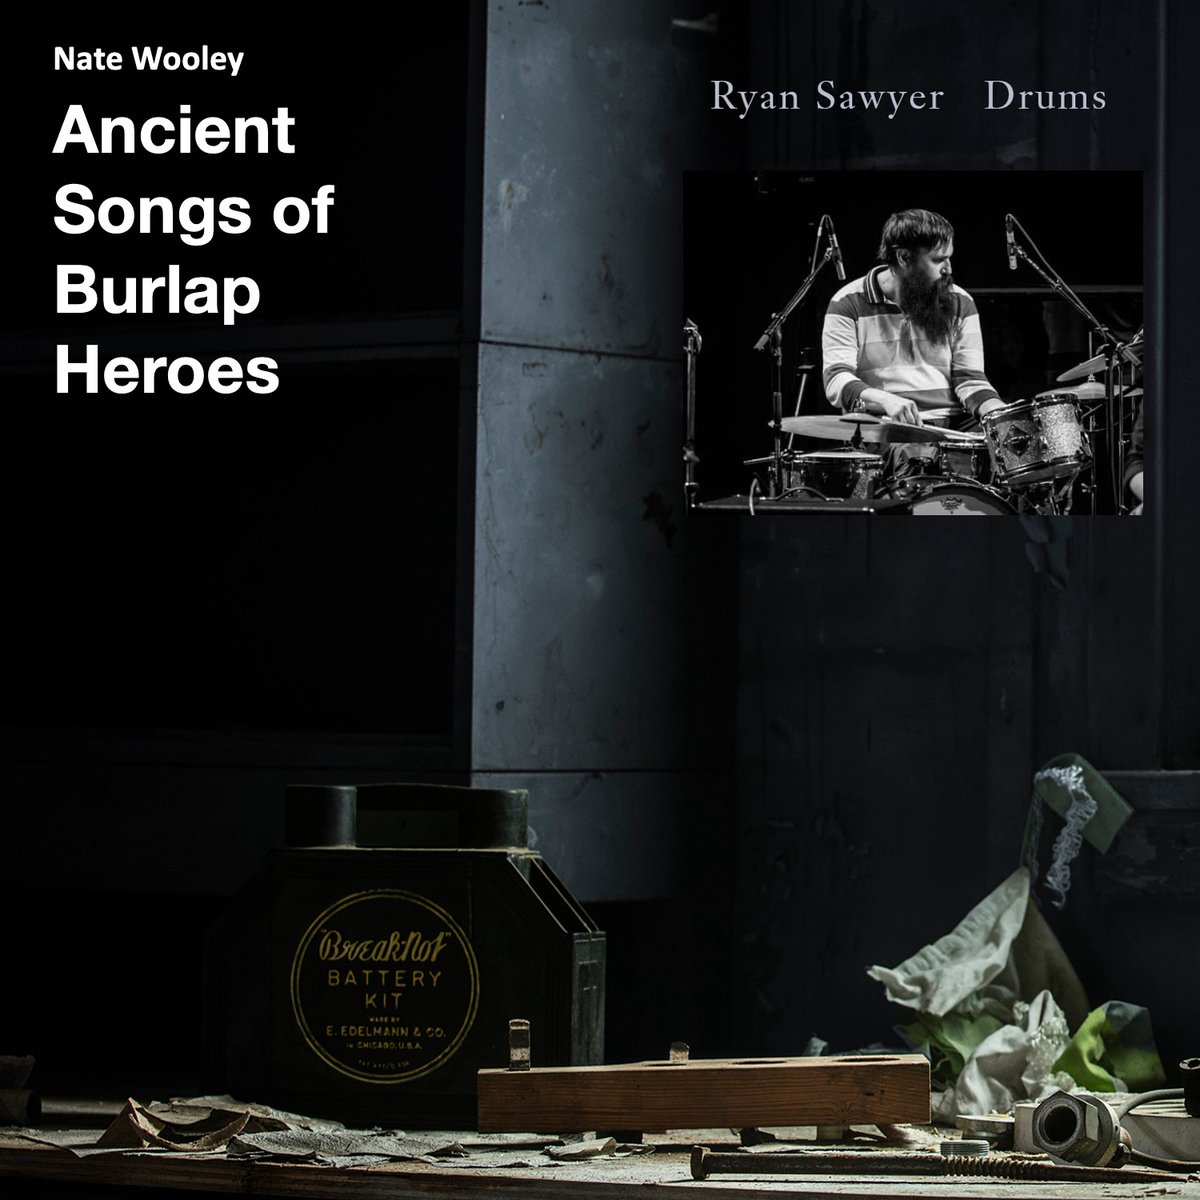 Ryan Sawyer plays drums on “Ancient Songs of Burlap Heroes,” due out July 29, 2022. Pre-order ”Ancient Songs of Burlap Heroes” natewooleypyroclastic.bandcamp.com/album/ancient-…